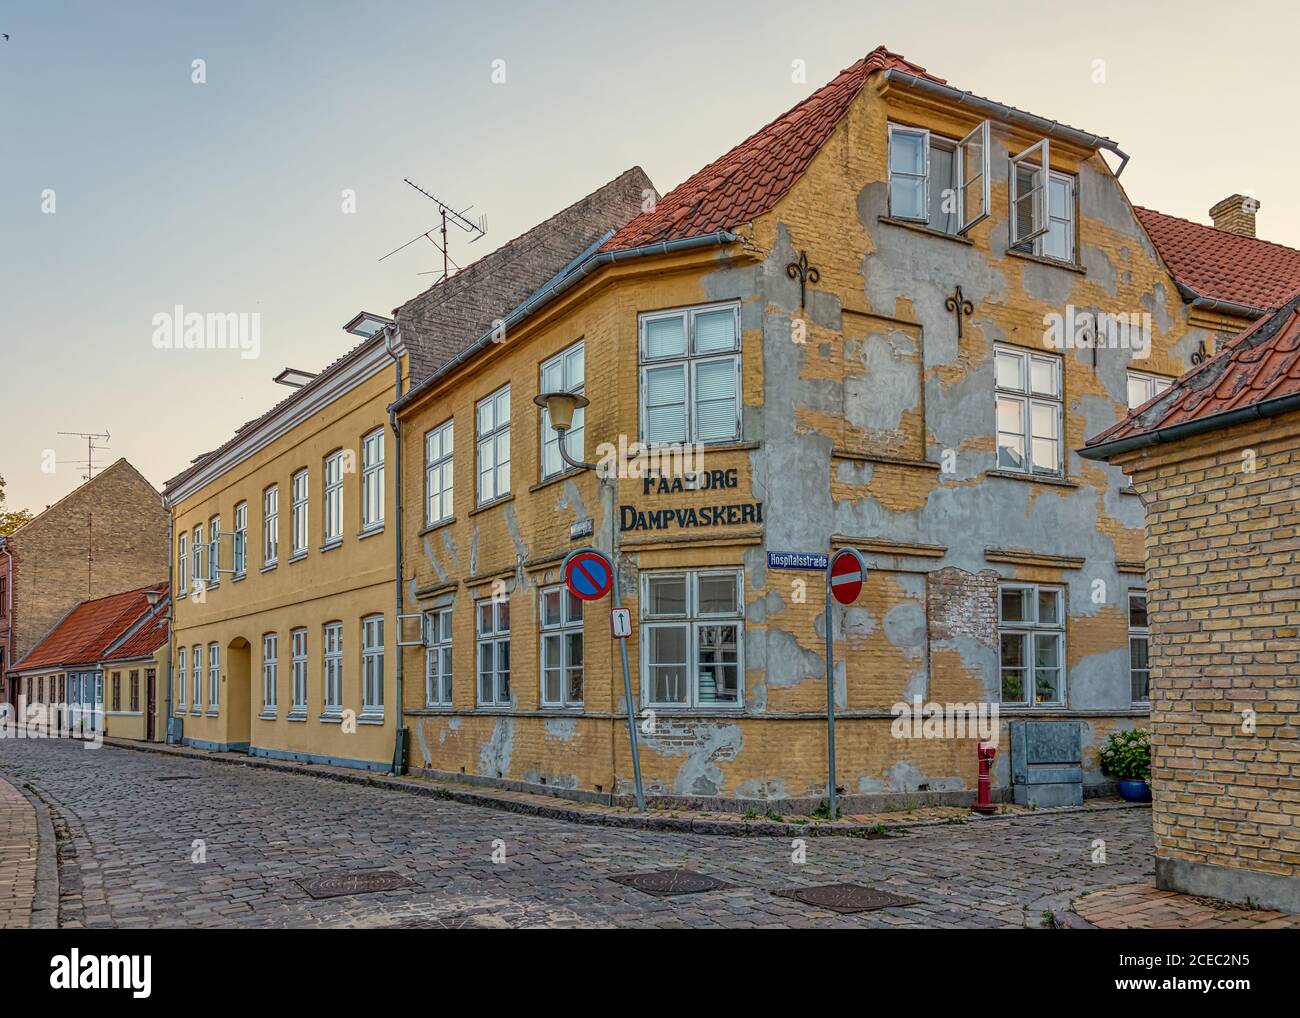 the rugged facede of an old laundry factory in Faaborg, Denmark, August 16, 2020 Stock Photo